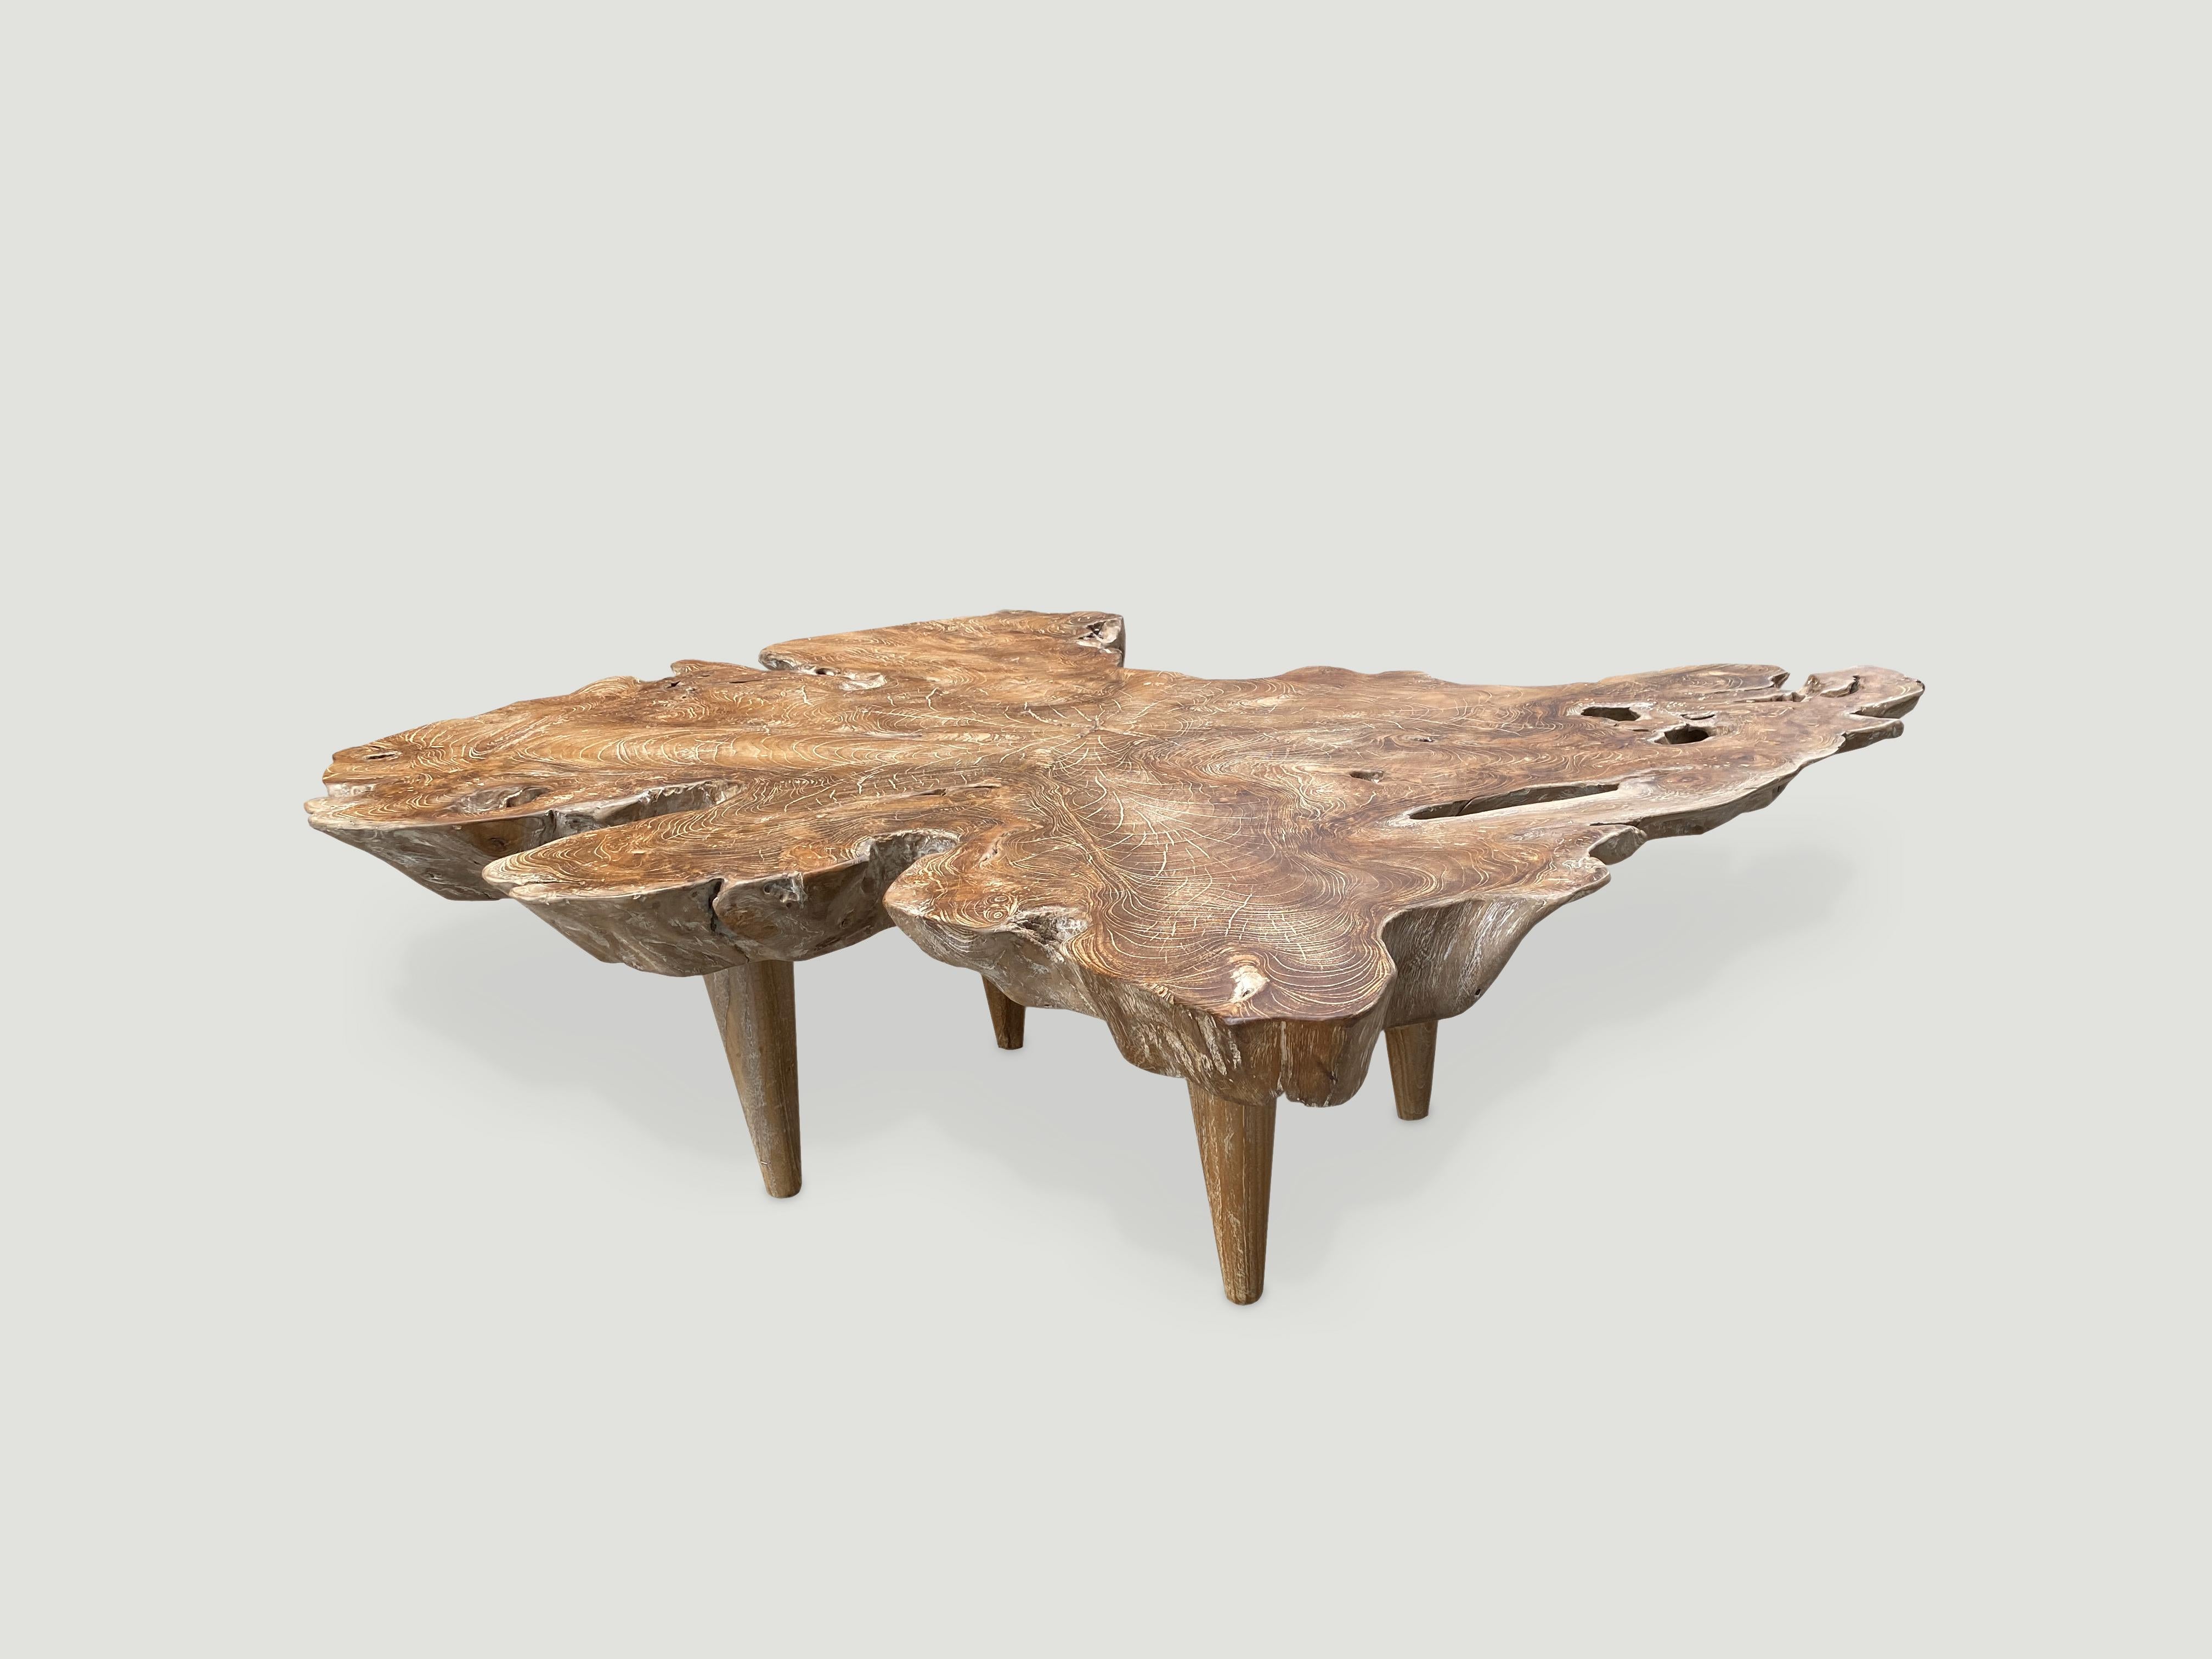 Impressive reclaimed three inch thick teak wood coffee table from the root of a tree. A blend of organic and midcentury. We added a light Cerused finish. Floating on midcentury style legs.

Own an Andrianna Shamaris original.

Andrianna Shamaris.